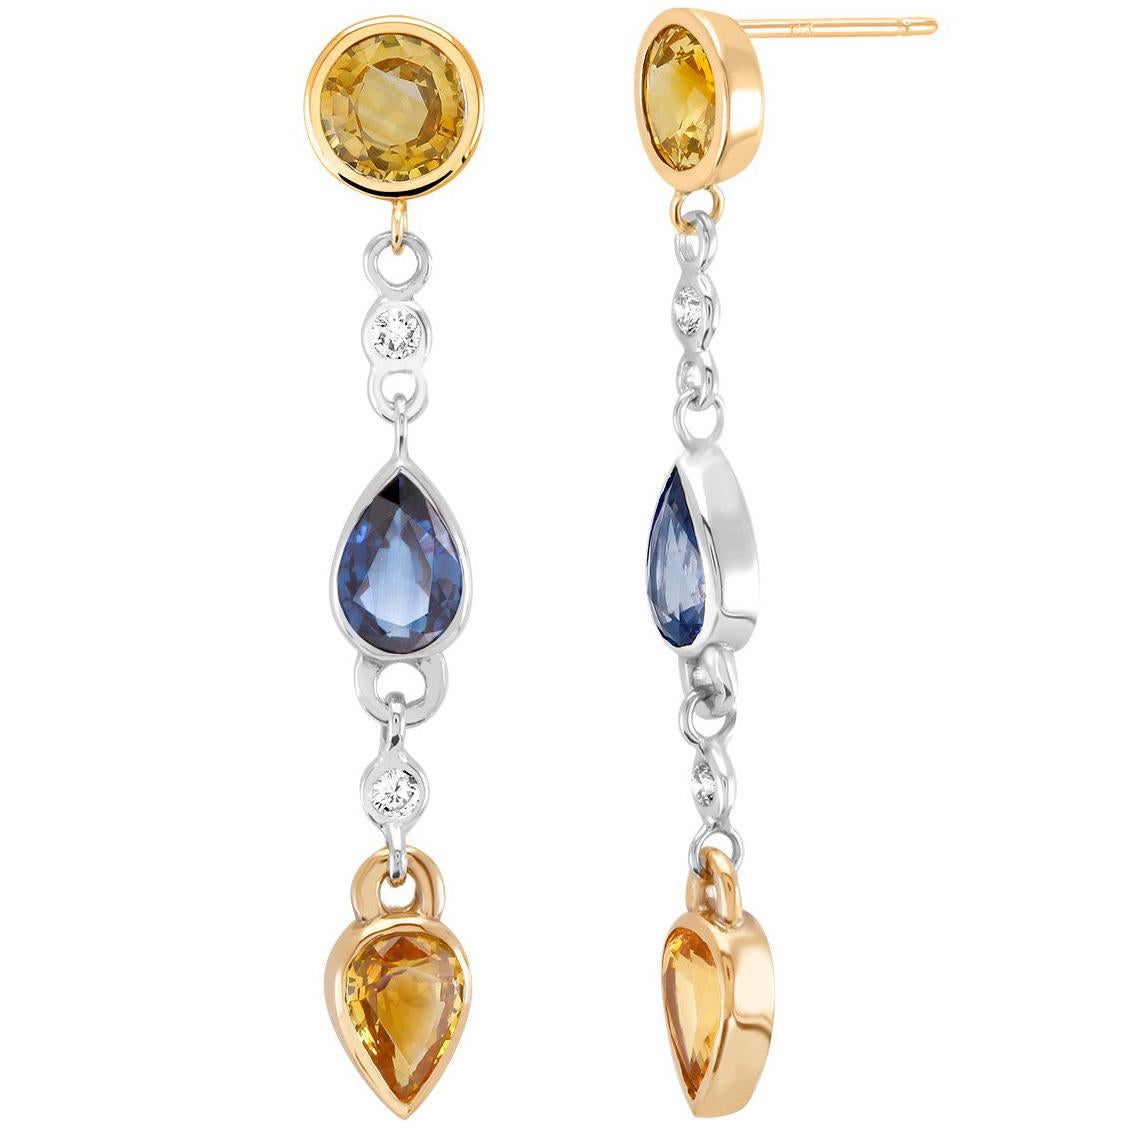 Yellow and Blue Sapphire Diamond Earrings Weighing 5.36 Carat 1.5 Inch Long